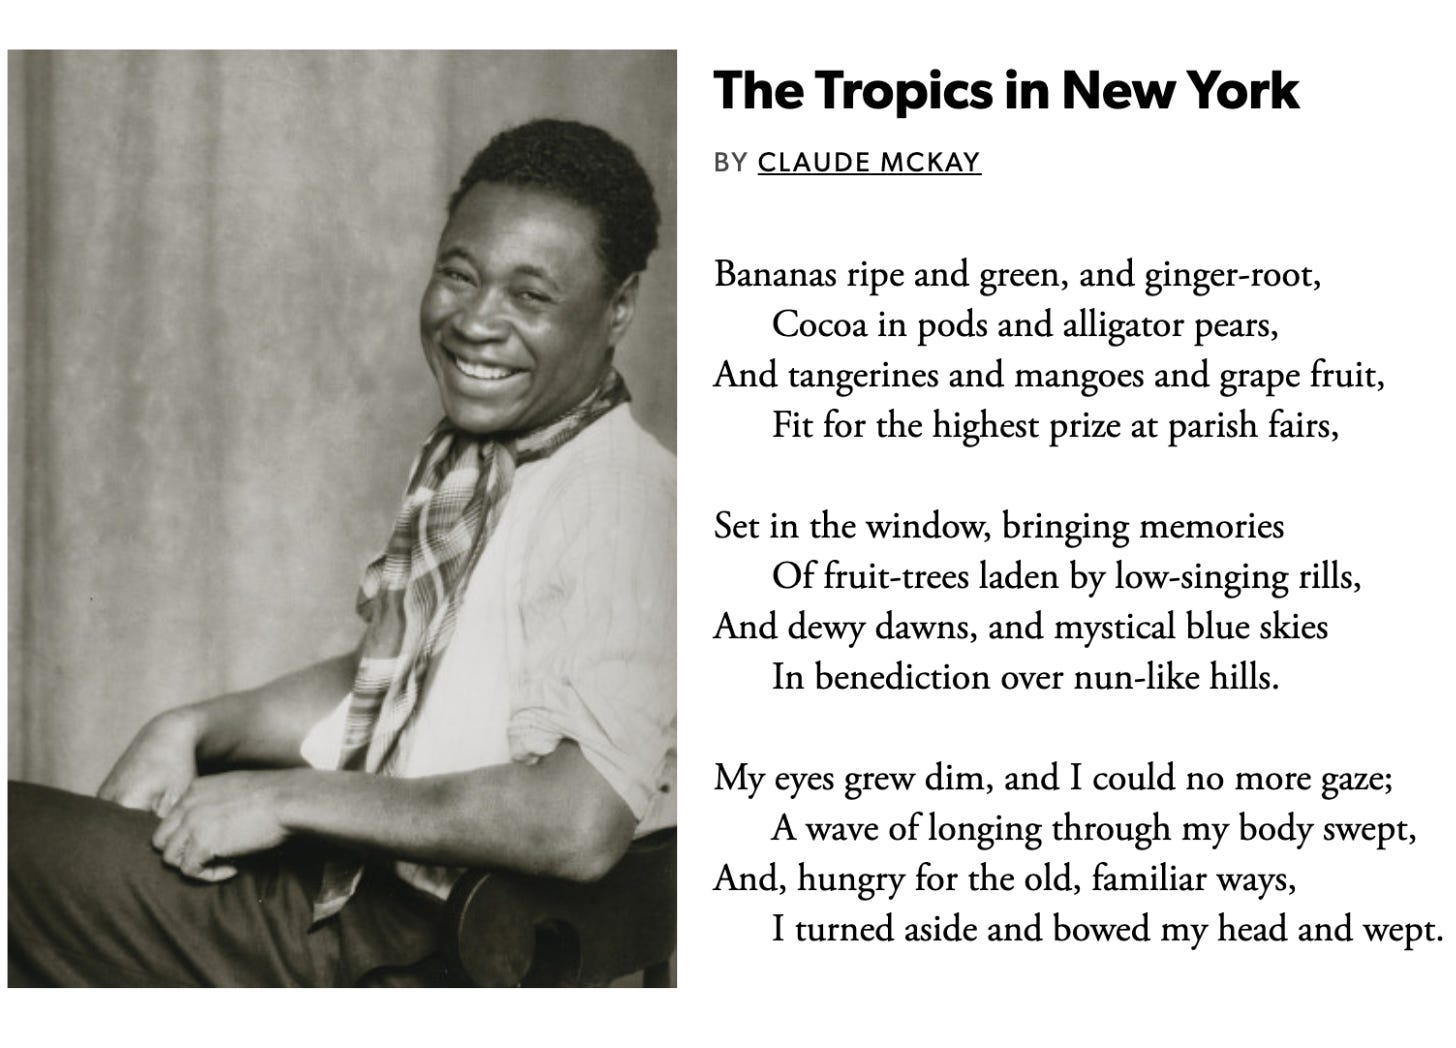 Black and white photo of Claude McKay beside poem, The Tropics in New York (poem written in alt text)  , , that reads: Bananas ripe and green, and ginger-root,       Cocoa in pods and alligator pears, And tangerines and mangoes and grape fruit,       Fit for the highest prize at parish fairs,  Set in the window, bringing memories       Of fruit-trees laden by low-singing rills, And dewy dawns, and mystical blue skies       In benediction over nun-like hills.  My eyes grew dim, and I could no more gaze;       A wave of longing through my body swept, And, hungry for the old, familiar ways,       I turned aside and bowed my head and wept.